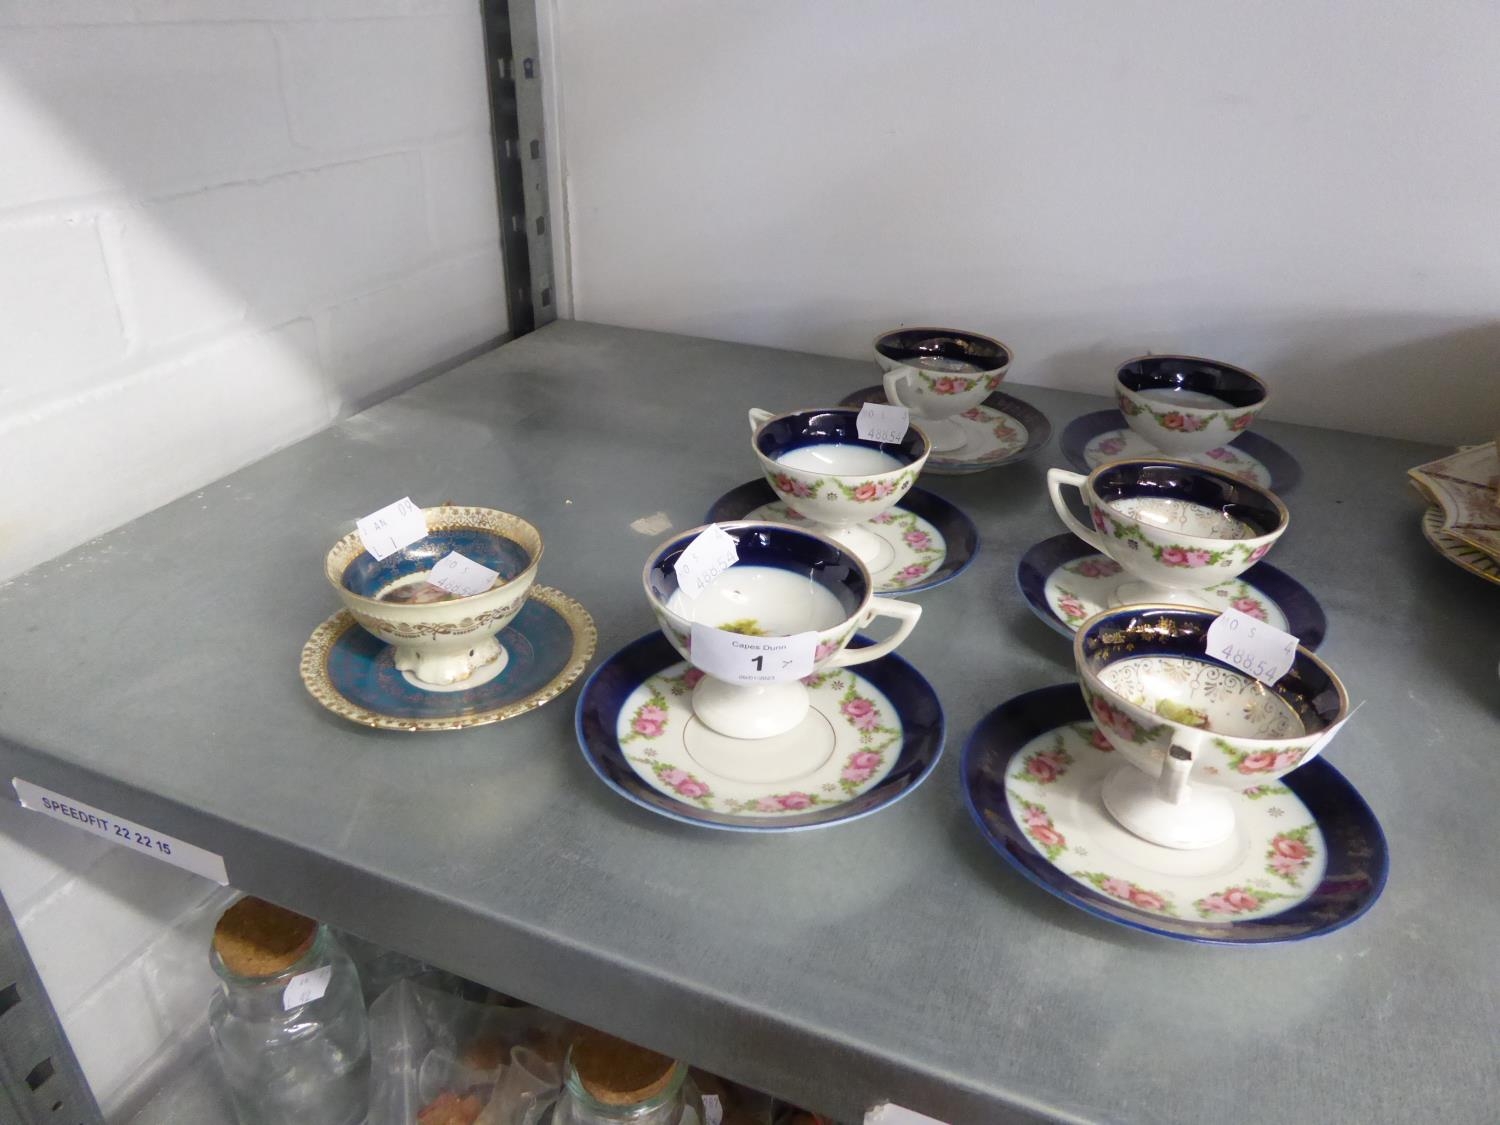 SET OF EARLY TWENTIETH CENTURY VIENNA PORCELAIN DEMI-TASSE COFFEE CUPS AND SAUCERS, DECORATED WITH